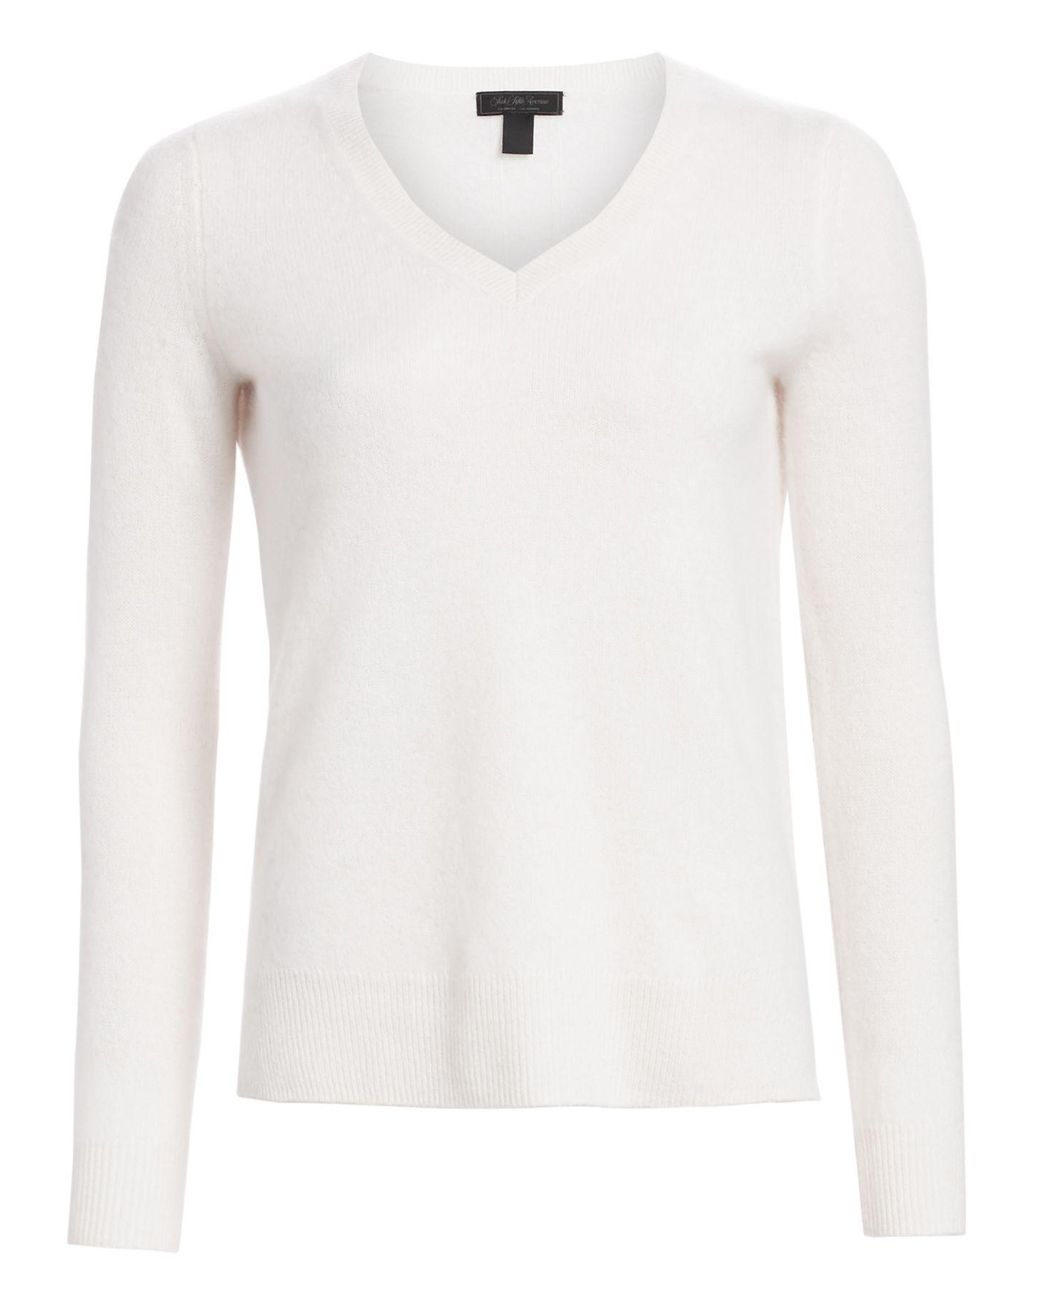 Saks Fifth Avenue Collection Featherweight Cashmere V-neck Sweater in